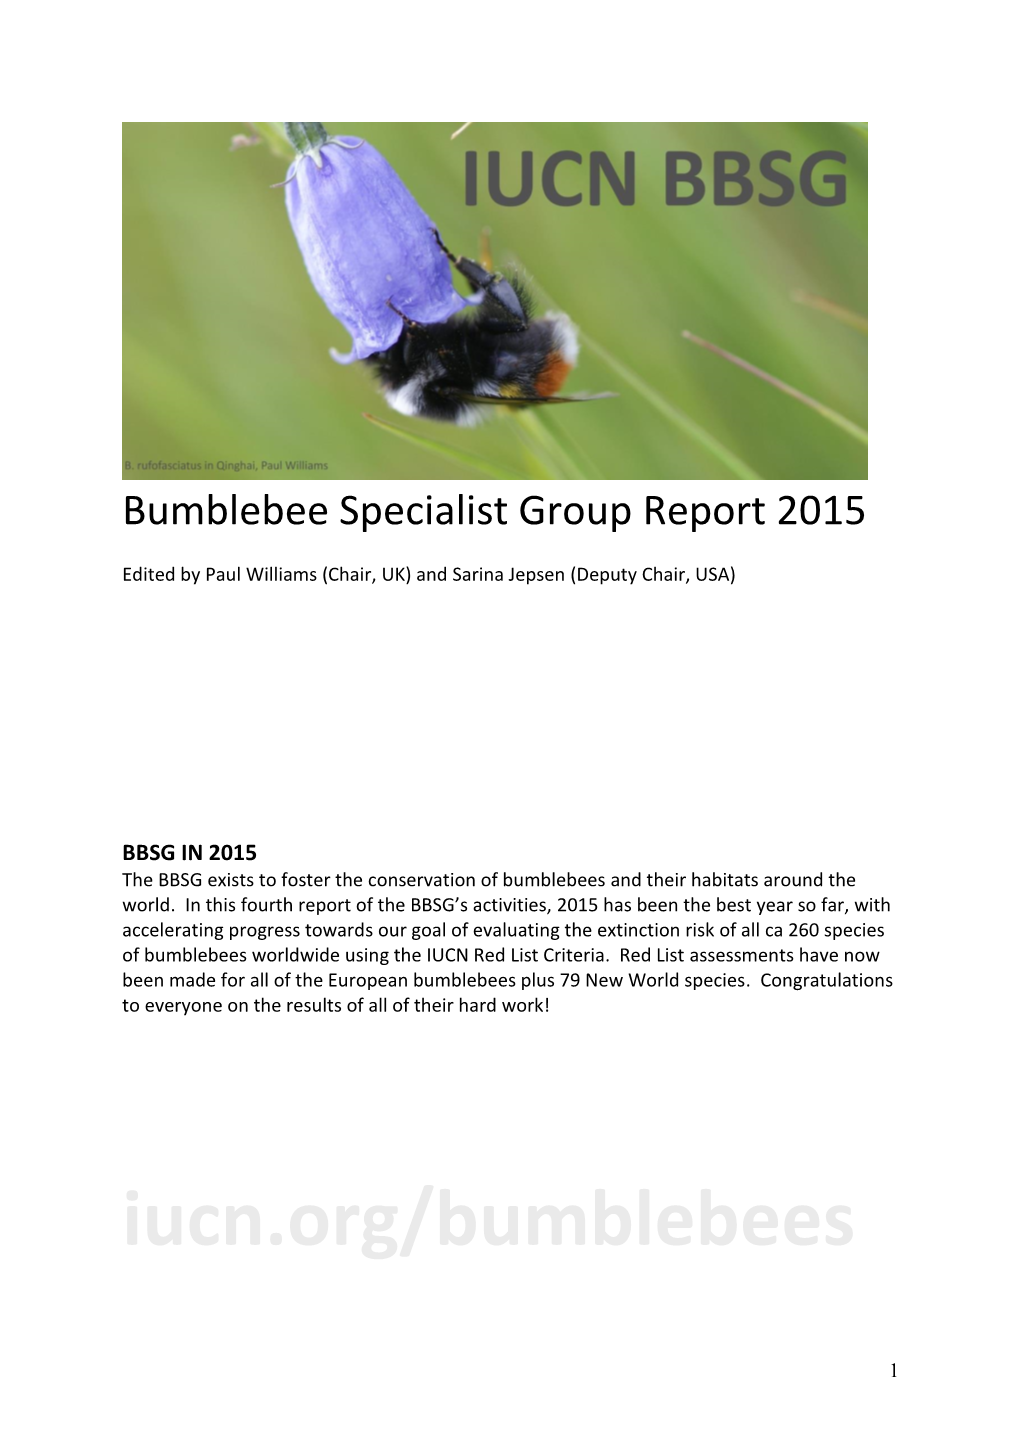 Annual Report of the IUCN/SSC Grasshopper Specialist Group (2010)